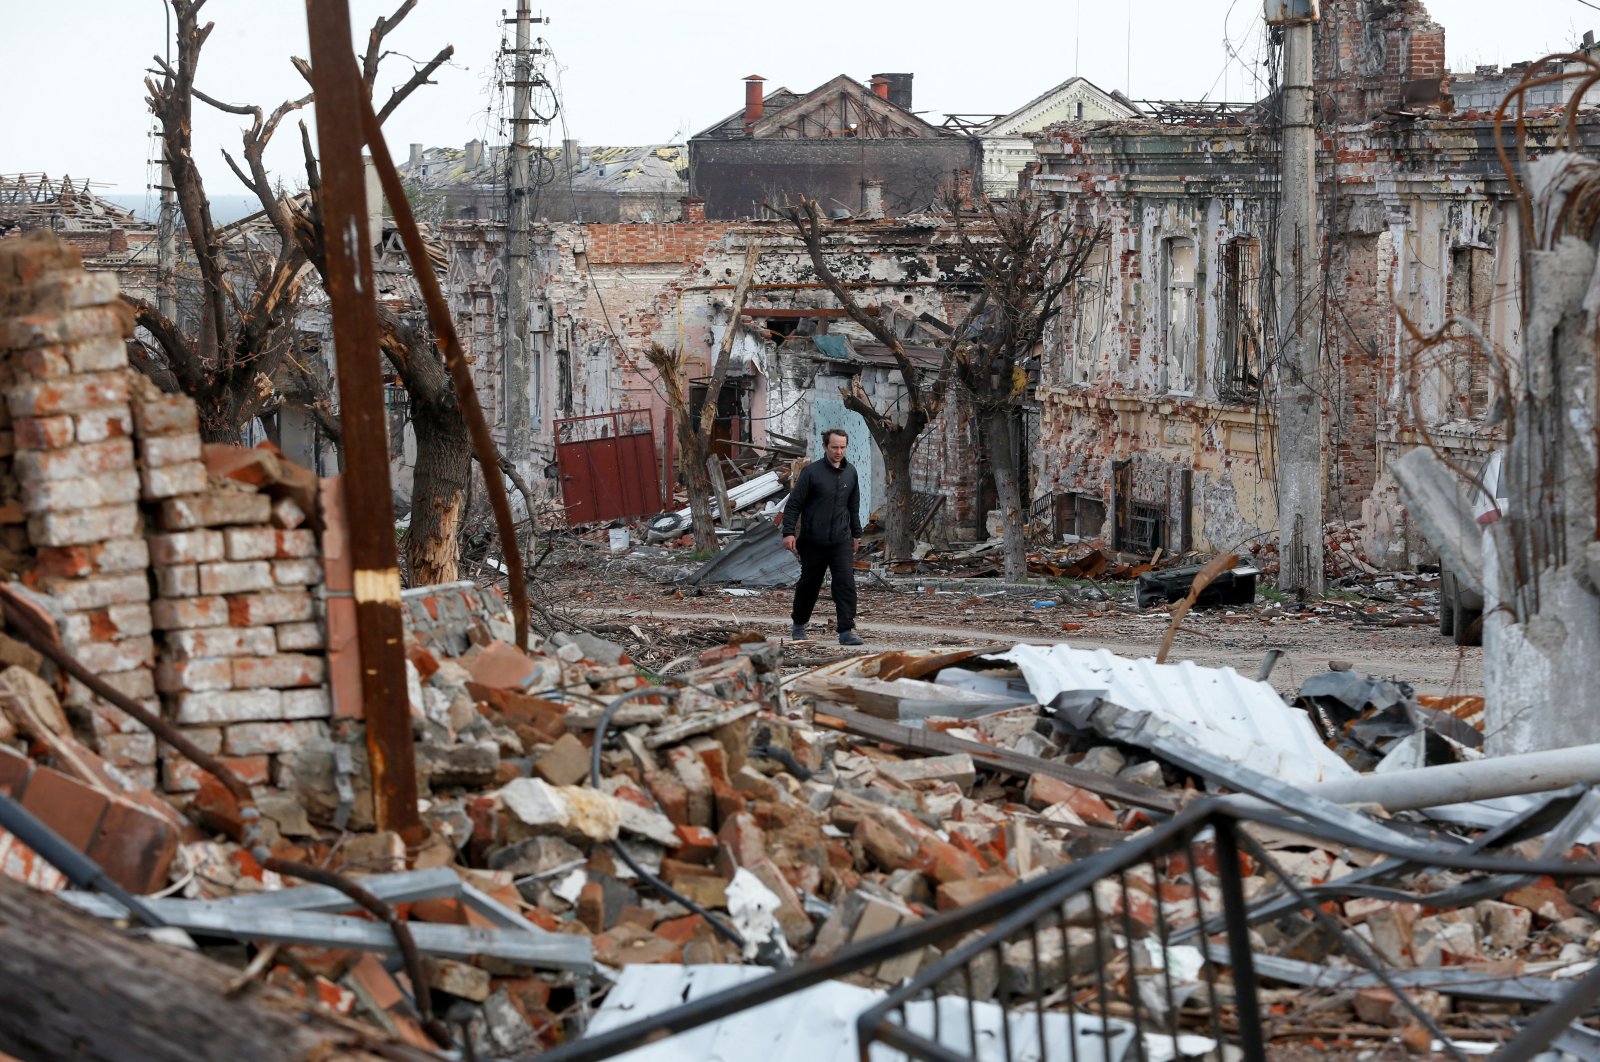 A man walks near damaged buildings in the course of the Ukraine-Russia conflict in the southern port city of Mariupol, Ukraine, April 22, 2022. (Reuters Photo)